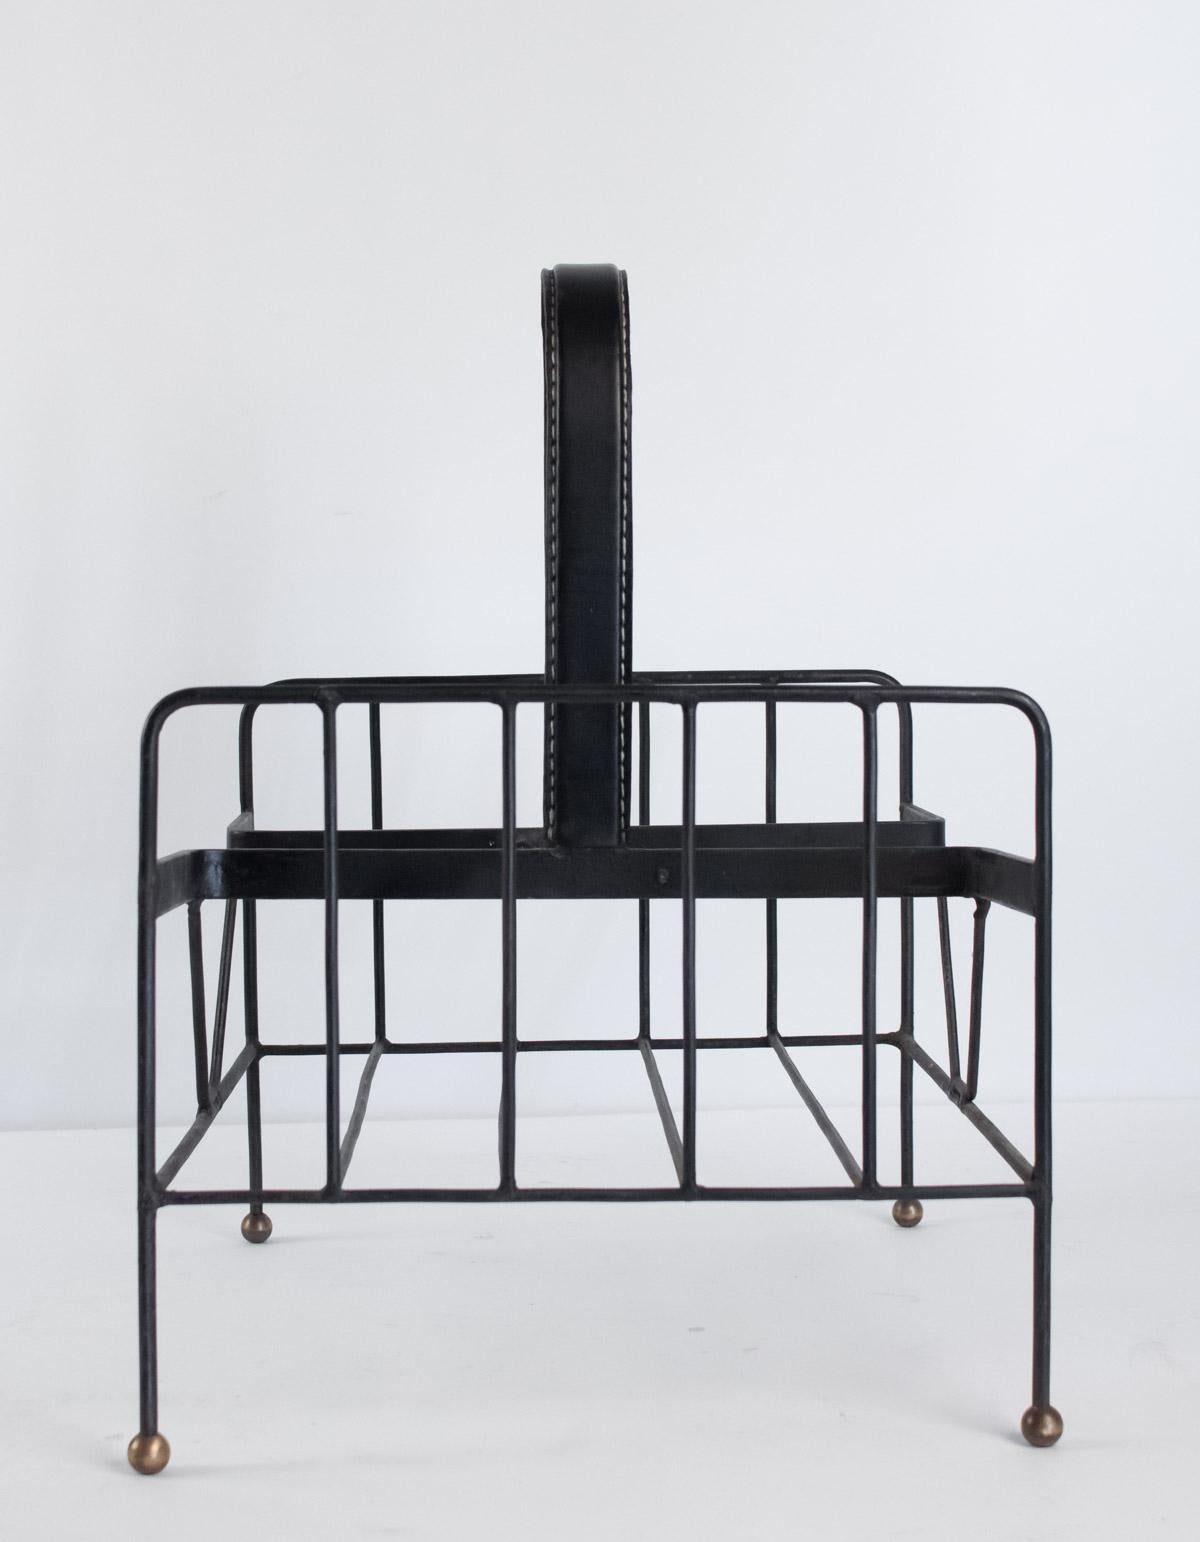 French Jacques Adnet Iron Magazine Rack, Leather and Steel, Design 1950